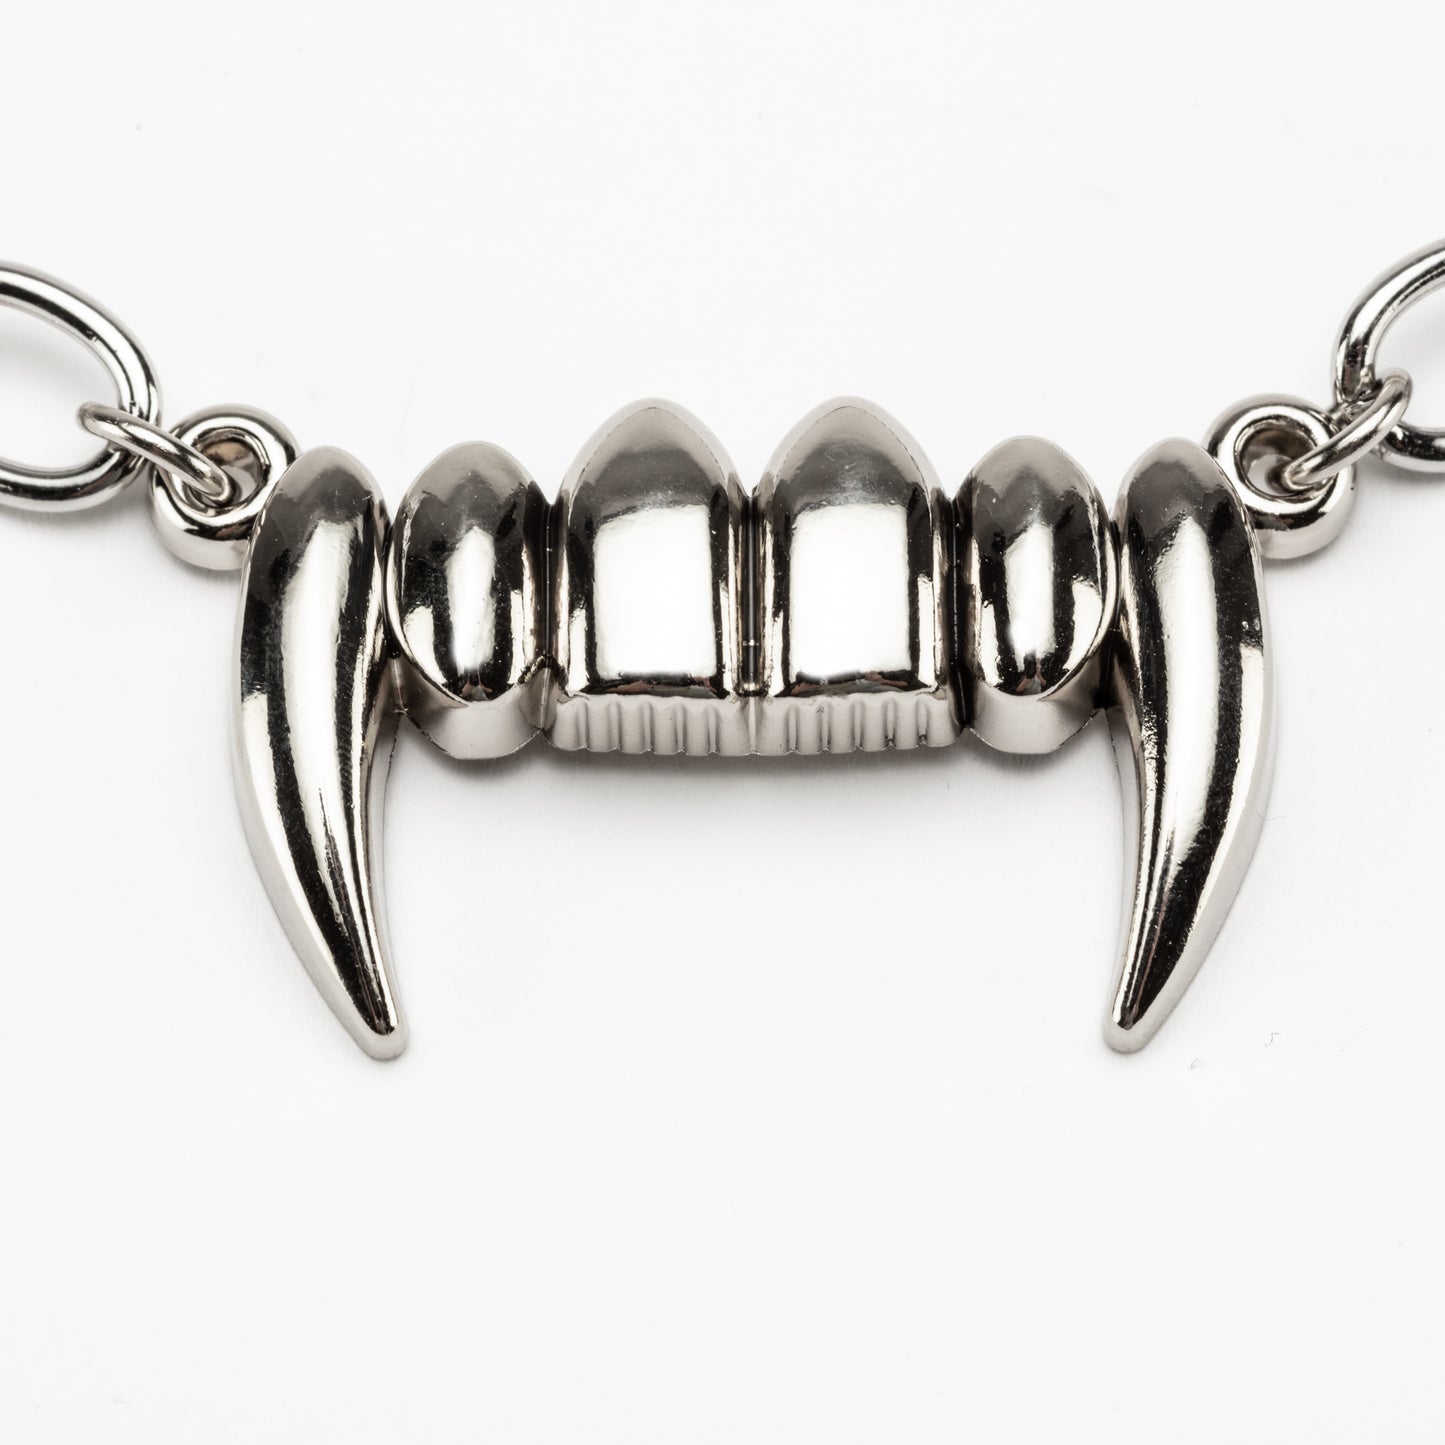 Fangs Chain Necklace